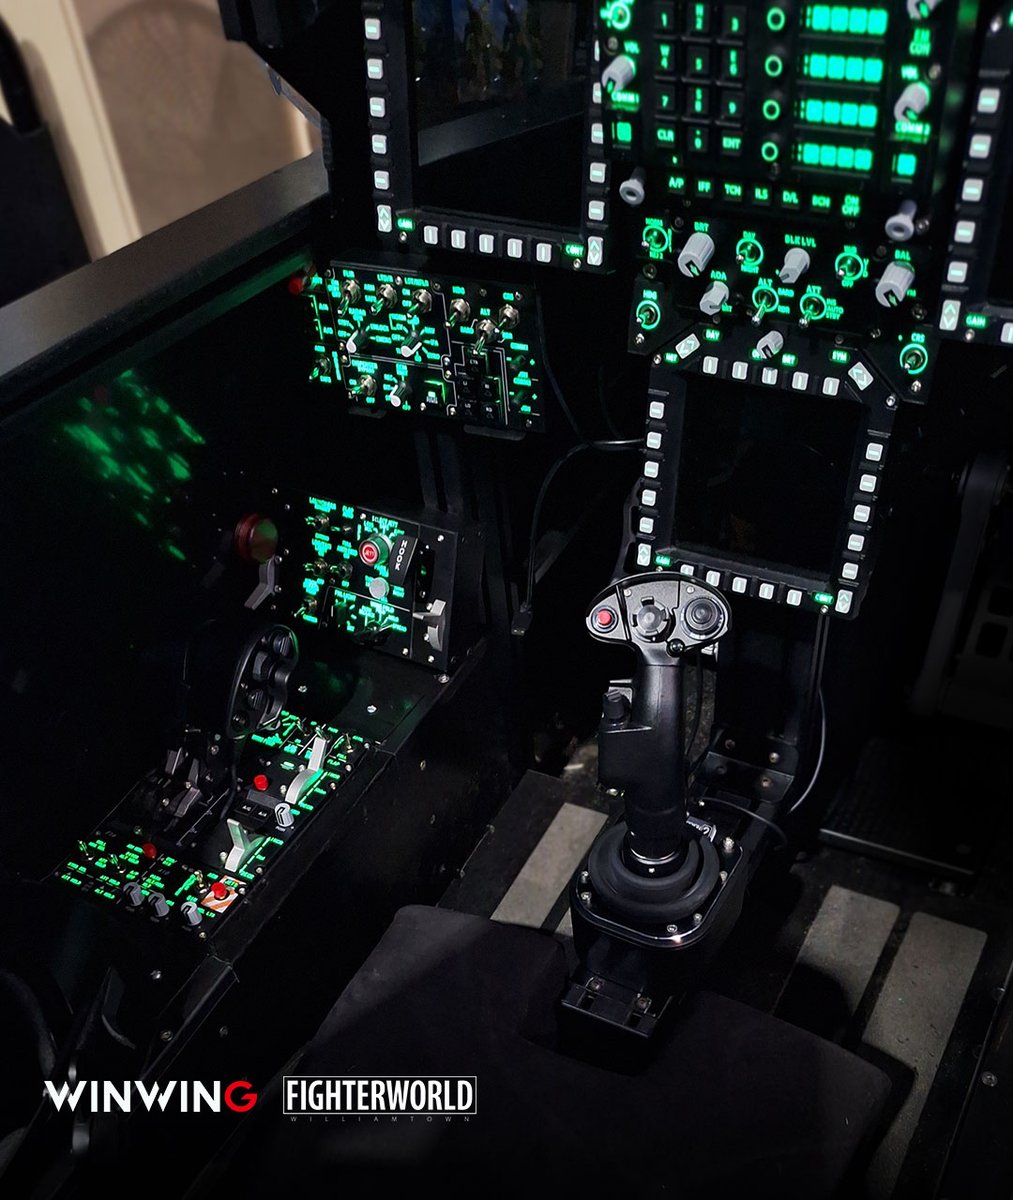 WINWING joins forces with FighterWorld to bring simulation to reality. 1. Authenticity Meets Technology: Our collaboration brings you the ultimate in-flight realism. At FighterWorld, you can now immerse yourself in a full-scale, one-to-one replica of the classic F-18 Hornet